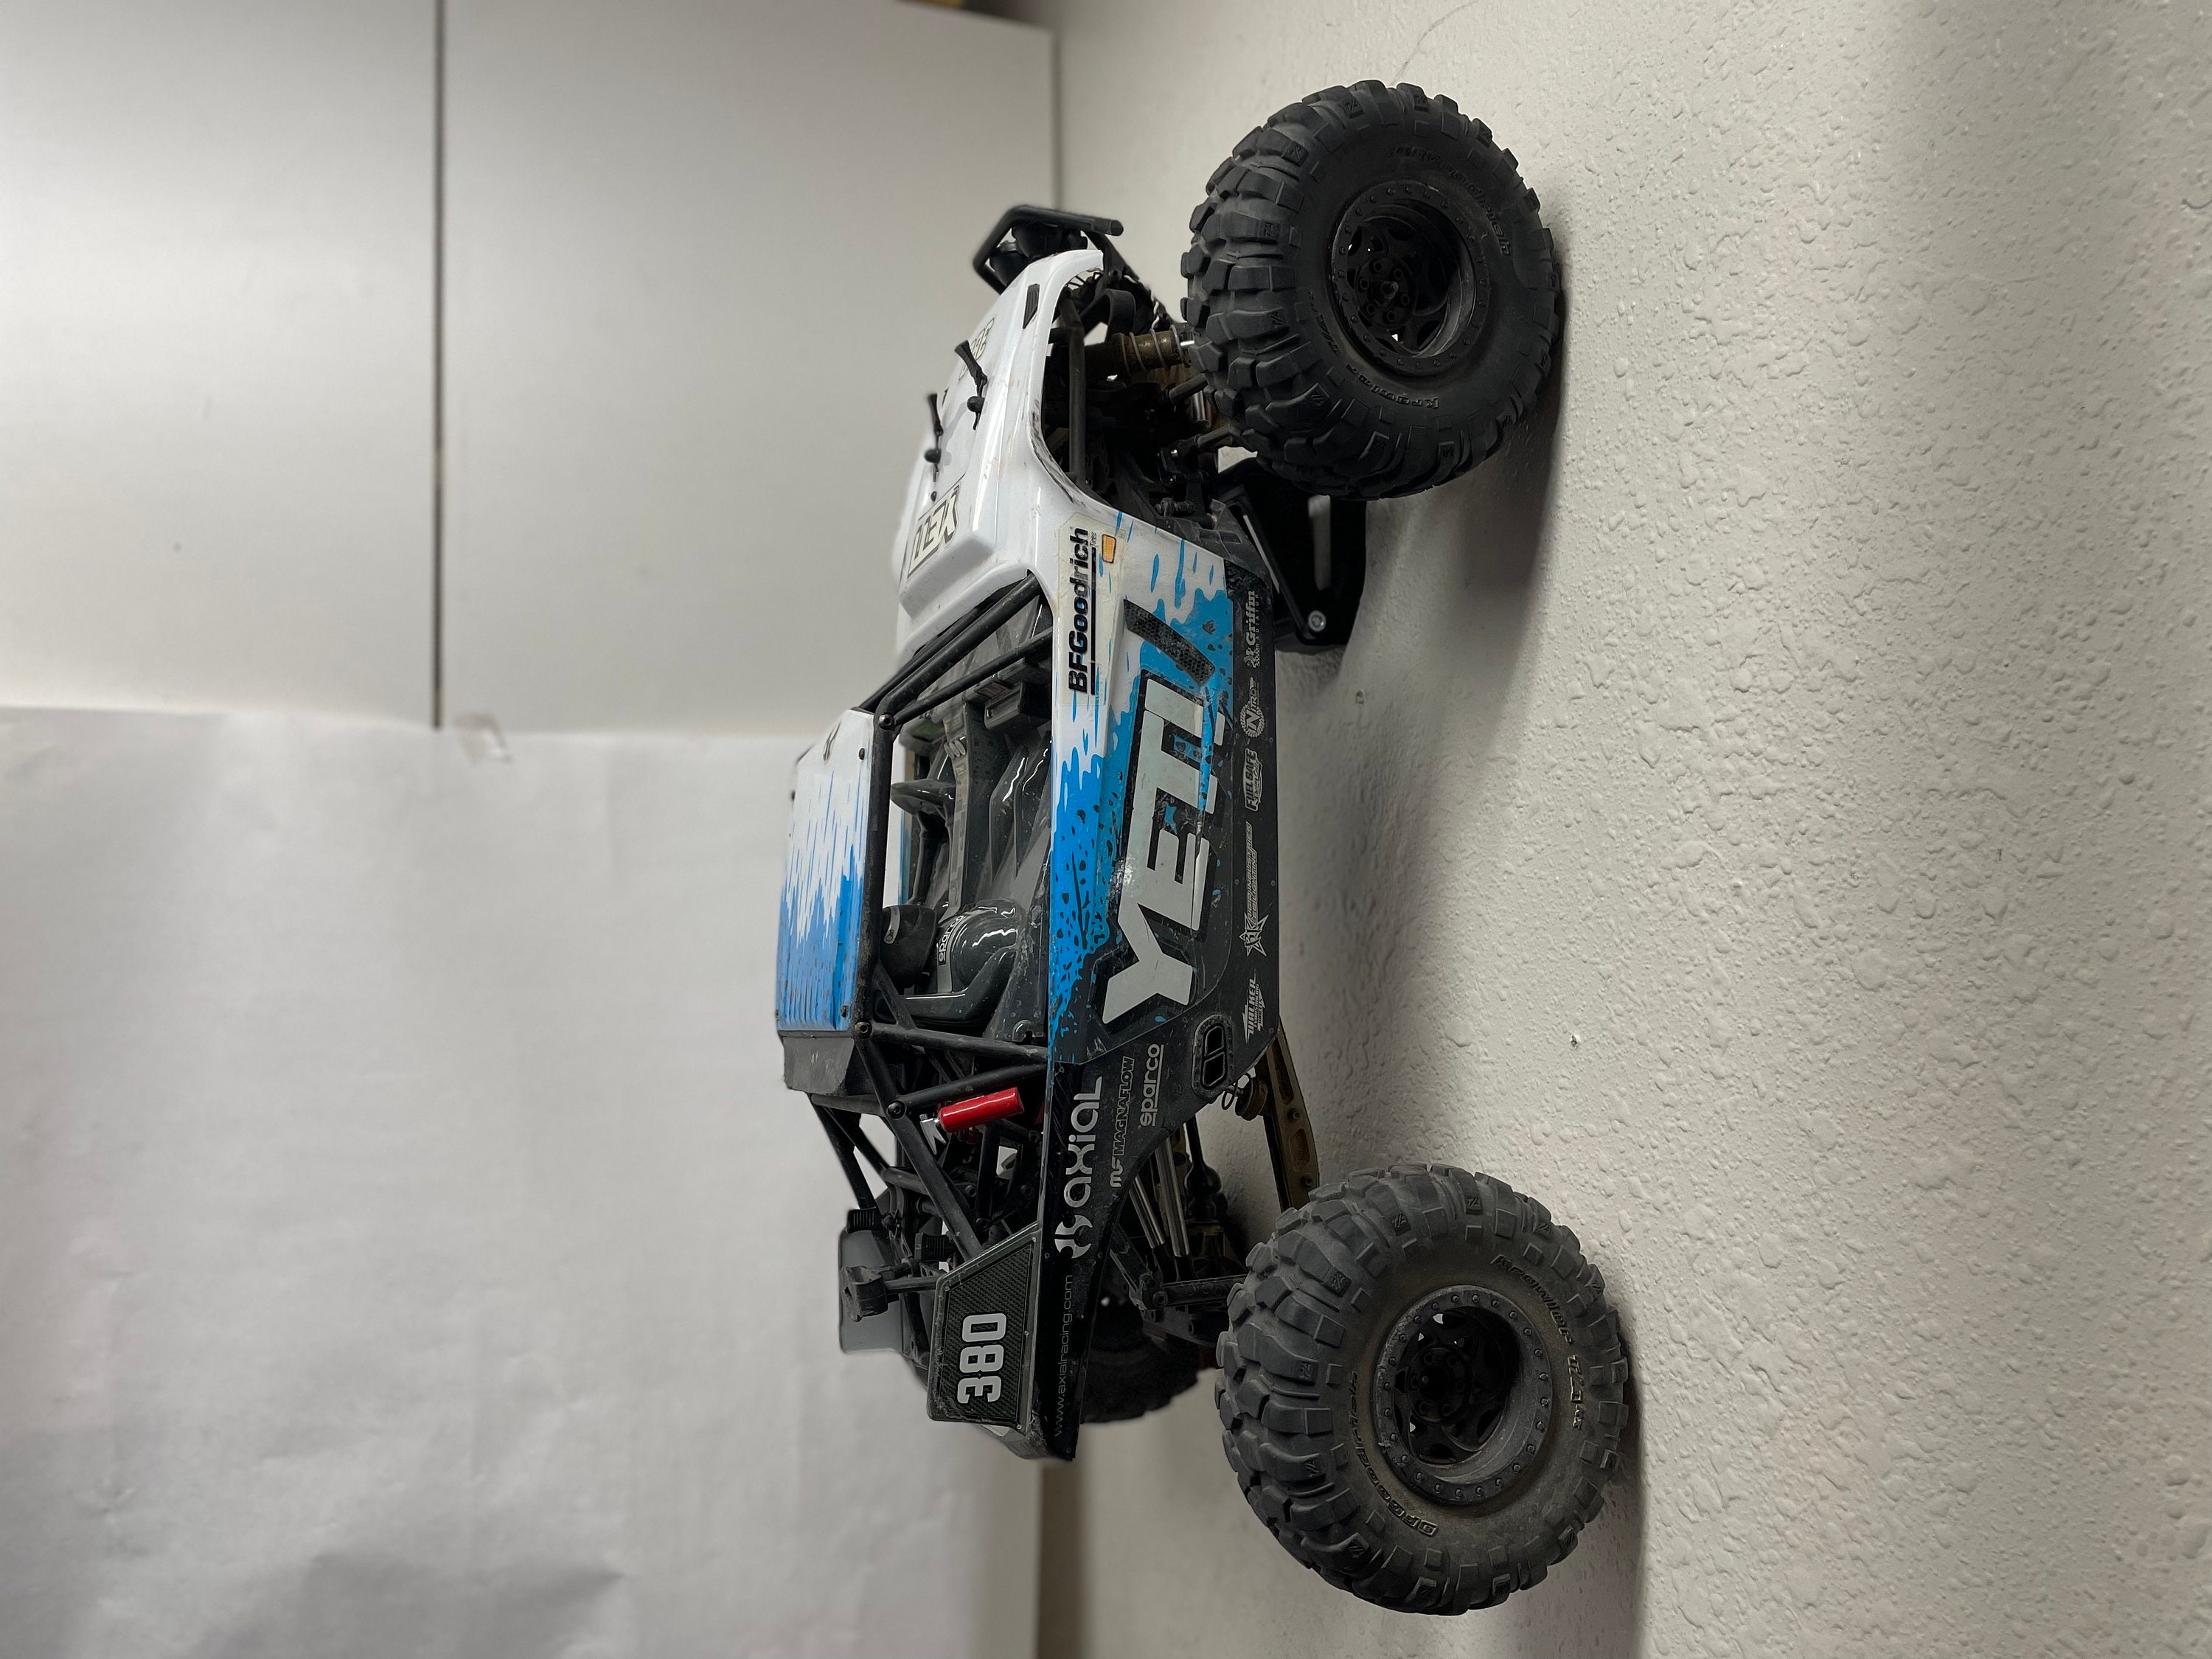 Exploded view: Axial Yeti 1:10 4WD RTR - Rear part